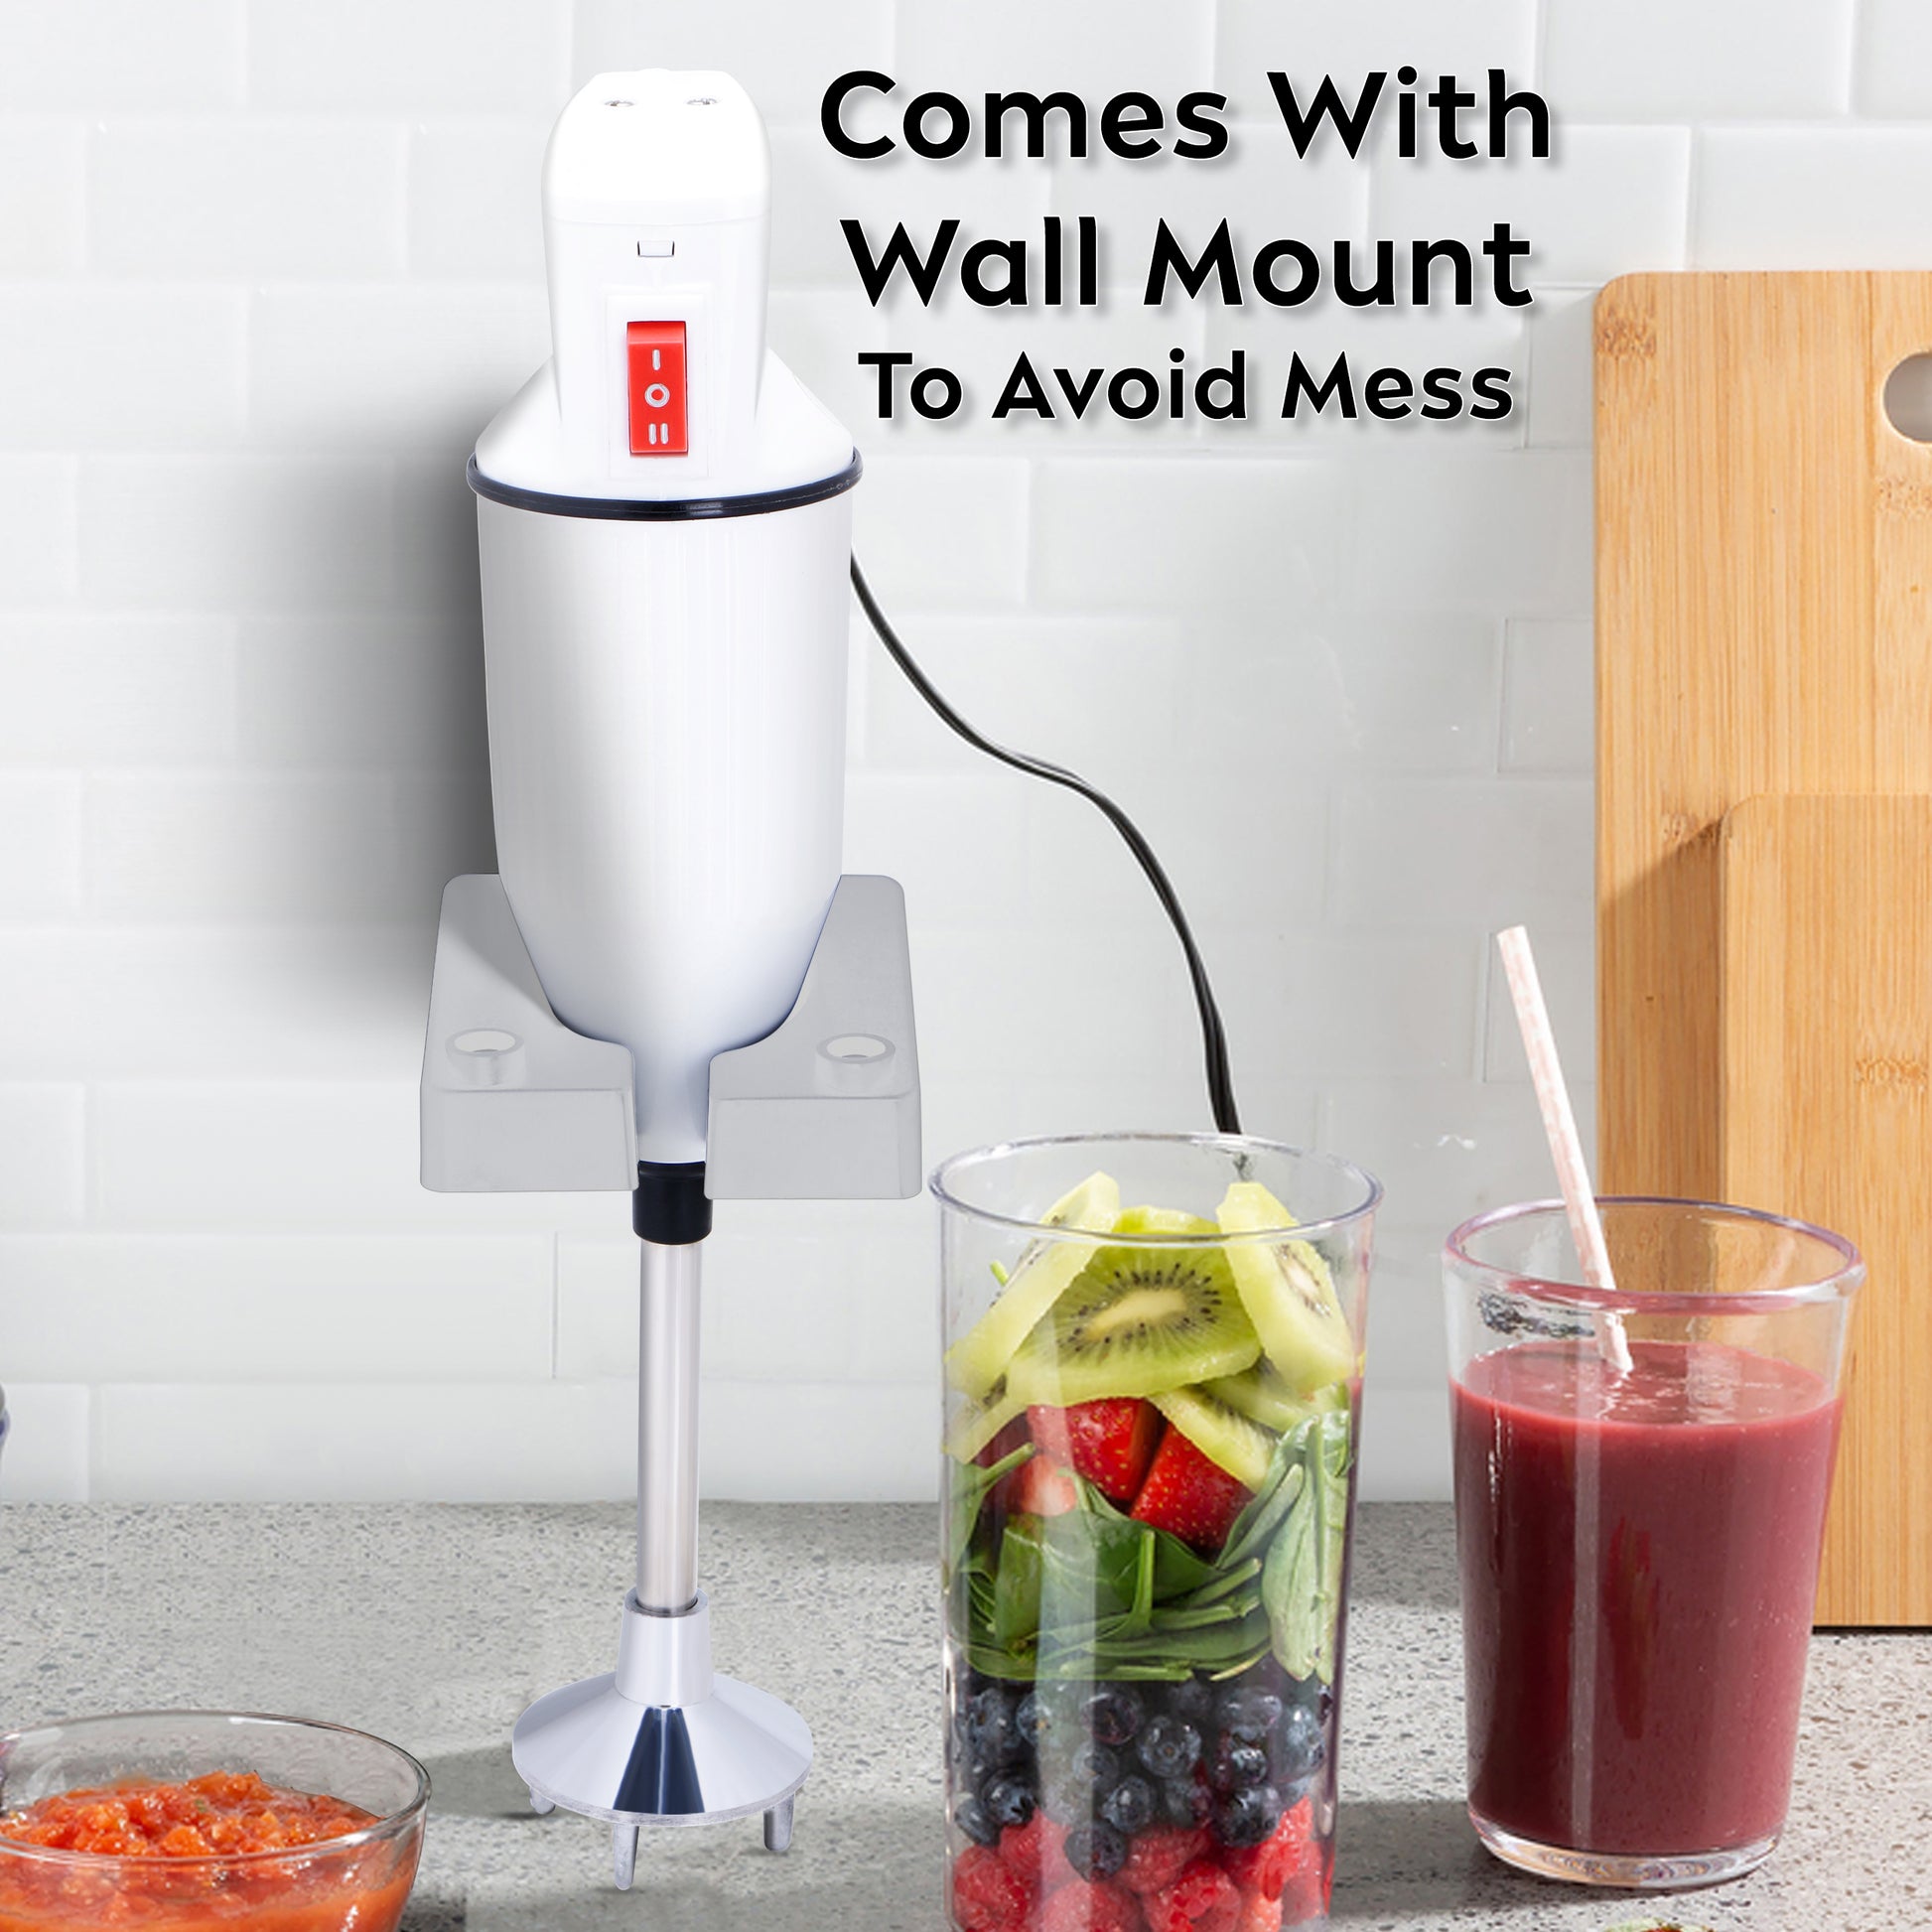 jenefy electric hand blender stainless steel 360w